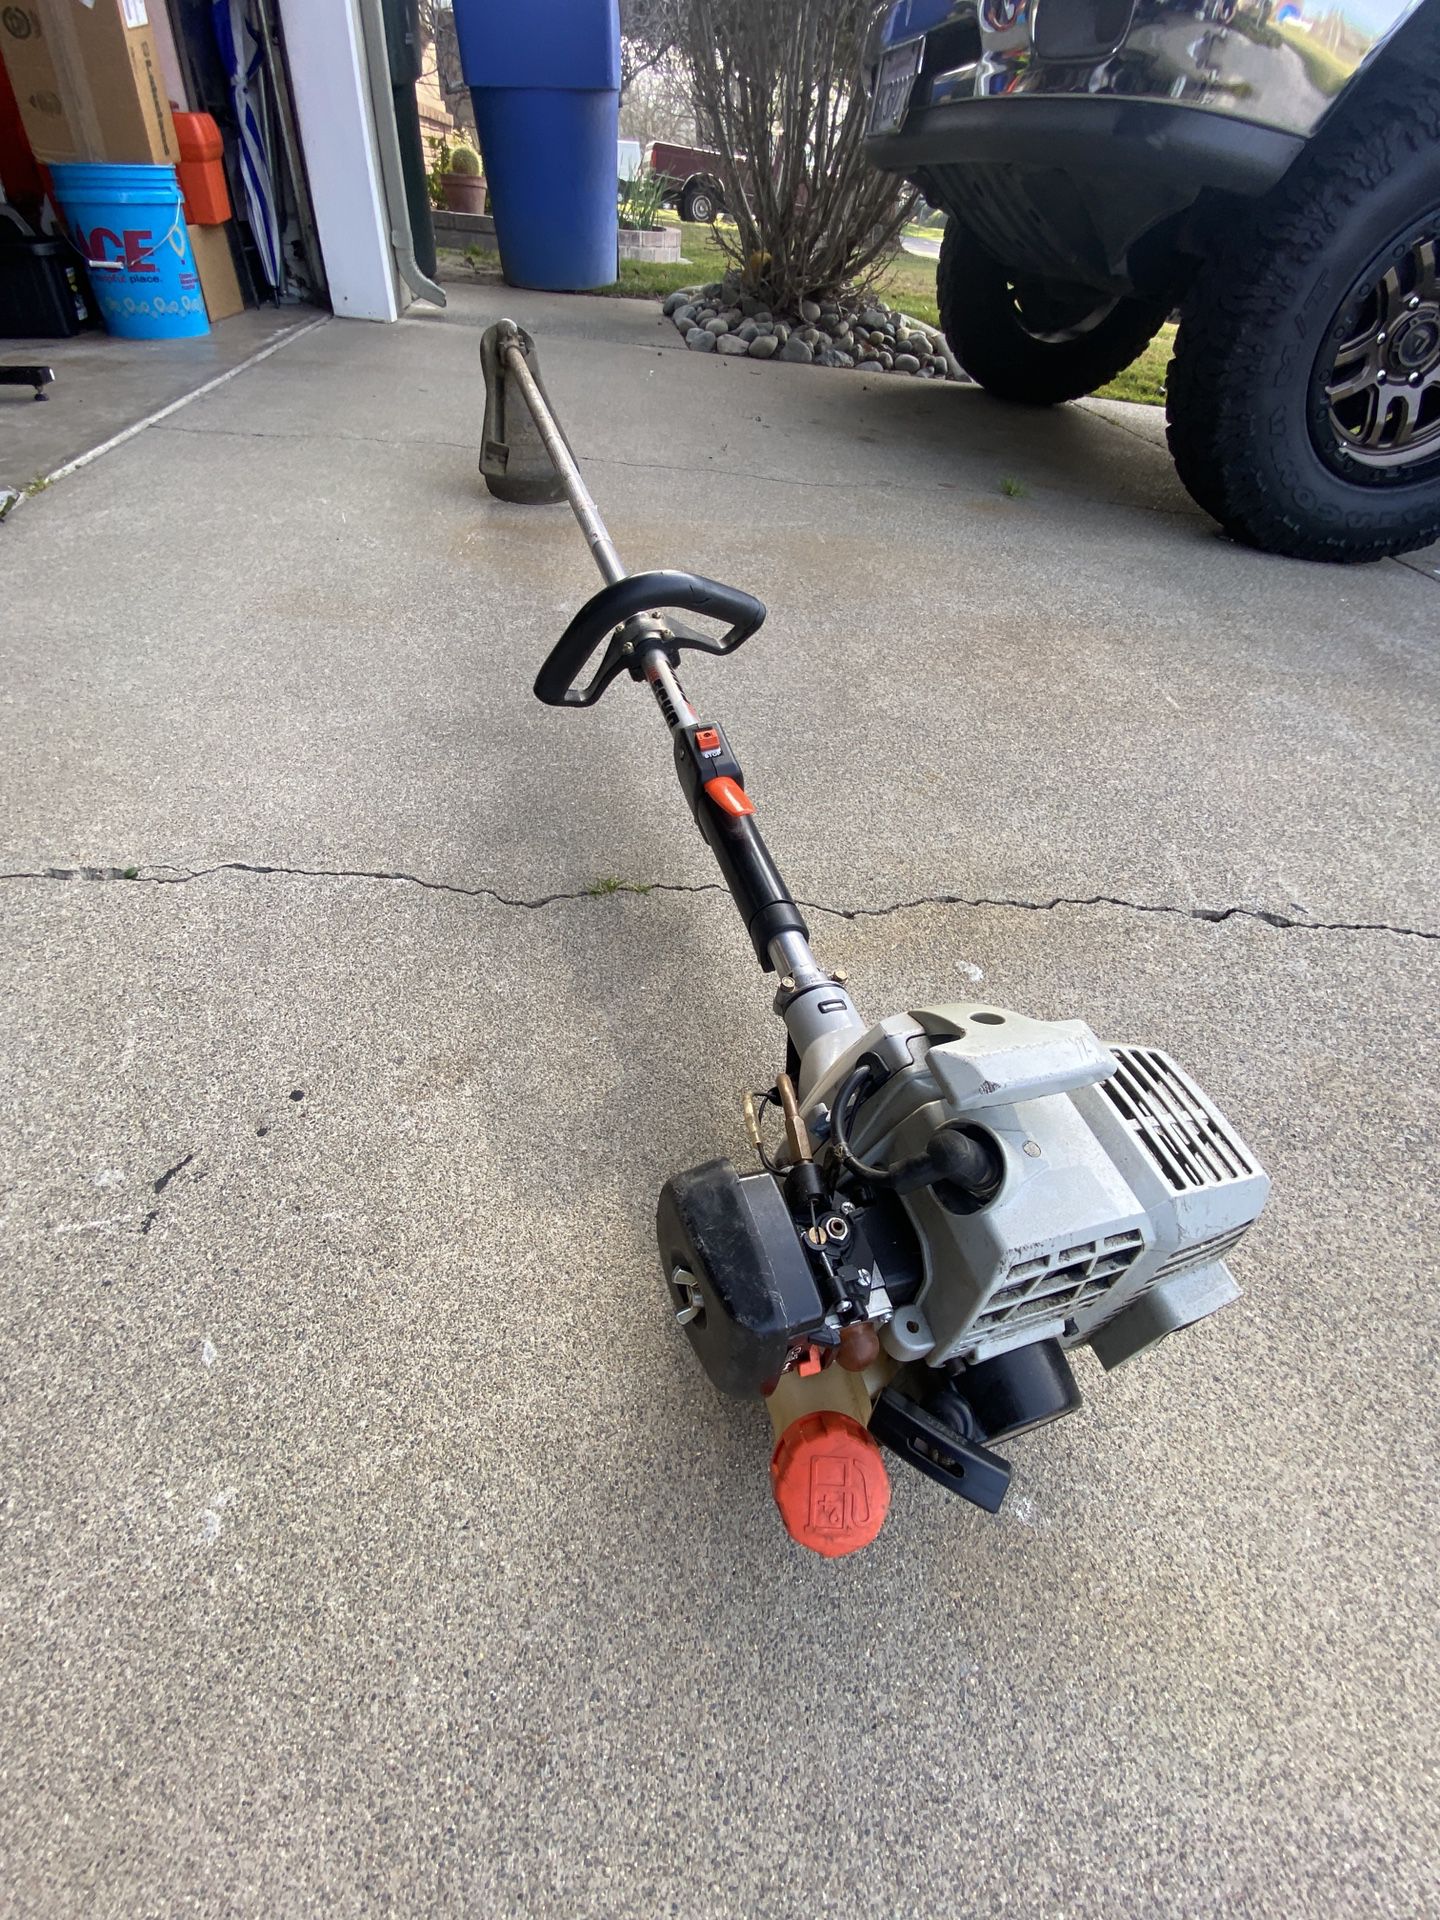 Black & Decker 24volt NST1024 Weed Eater With Battery for Sale in Temecula,  CA - OfferUp